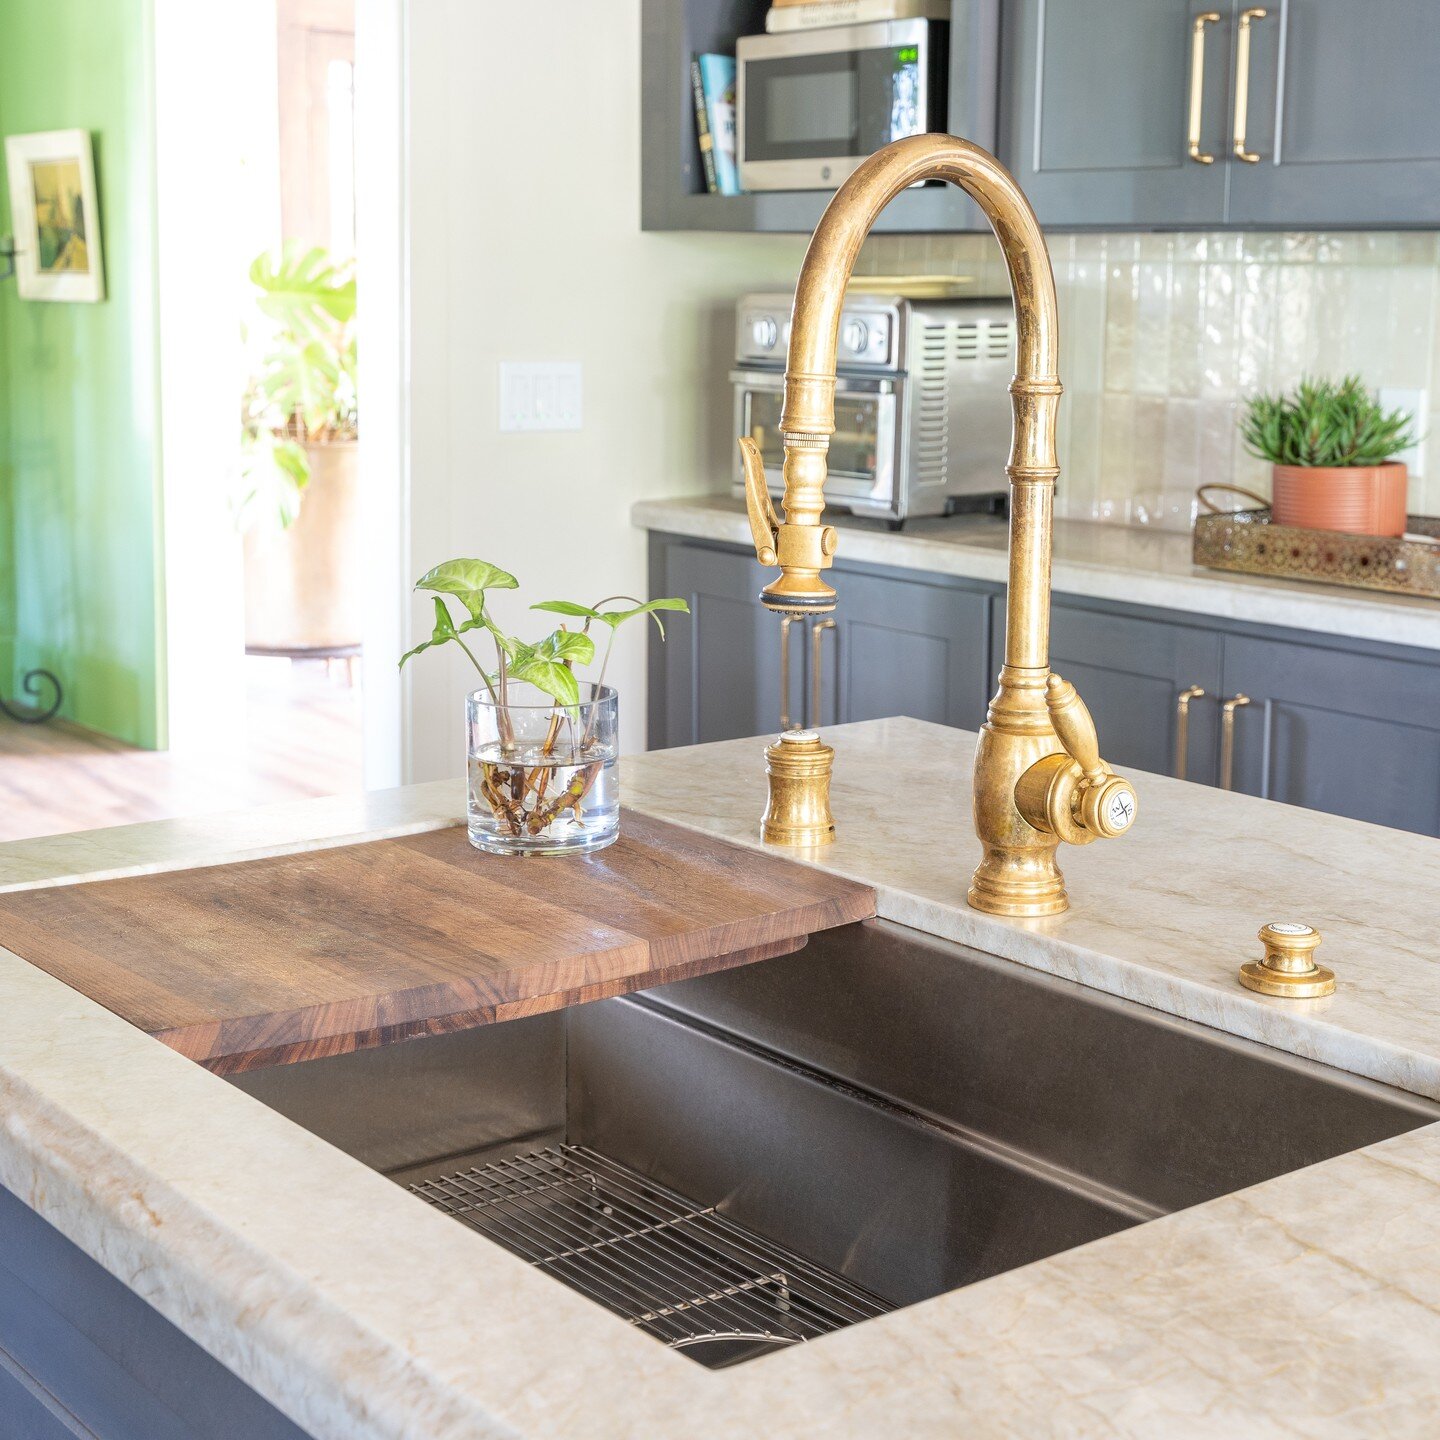 Another view of the kitchen remodel we recently finished in a historic home in Long Beach CA. We just love the brass faucet by Waterstone faucet and the Julien SmartStation sink! 
GC: @gripconstruction 
#waterstonefaucets #longbeachinteriordesigner #